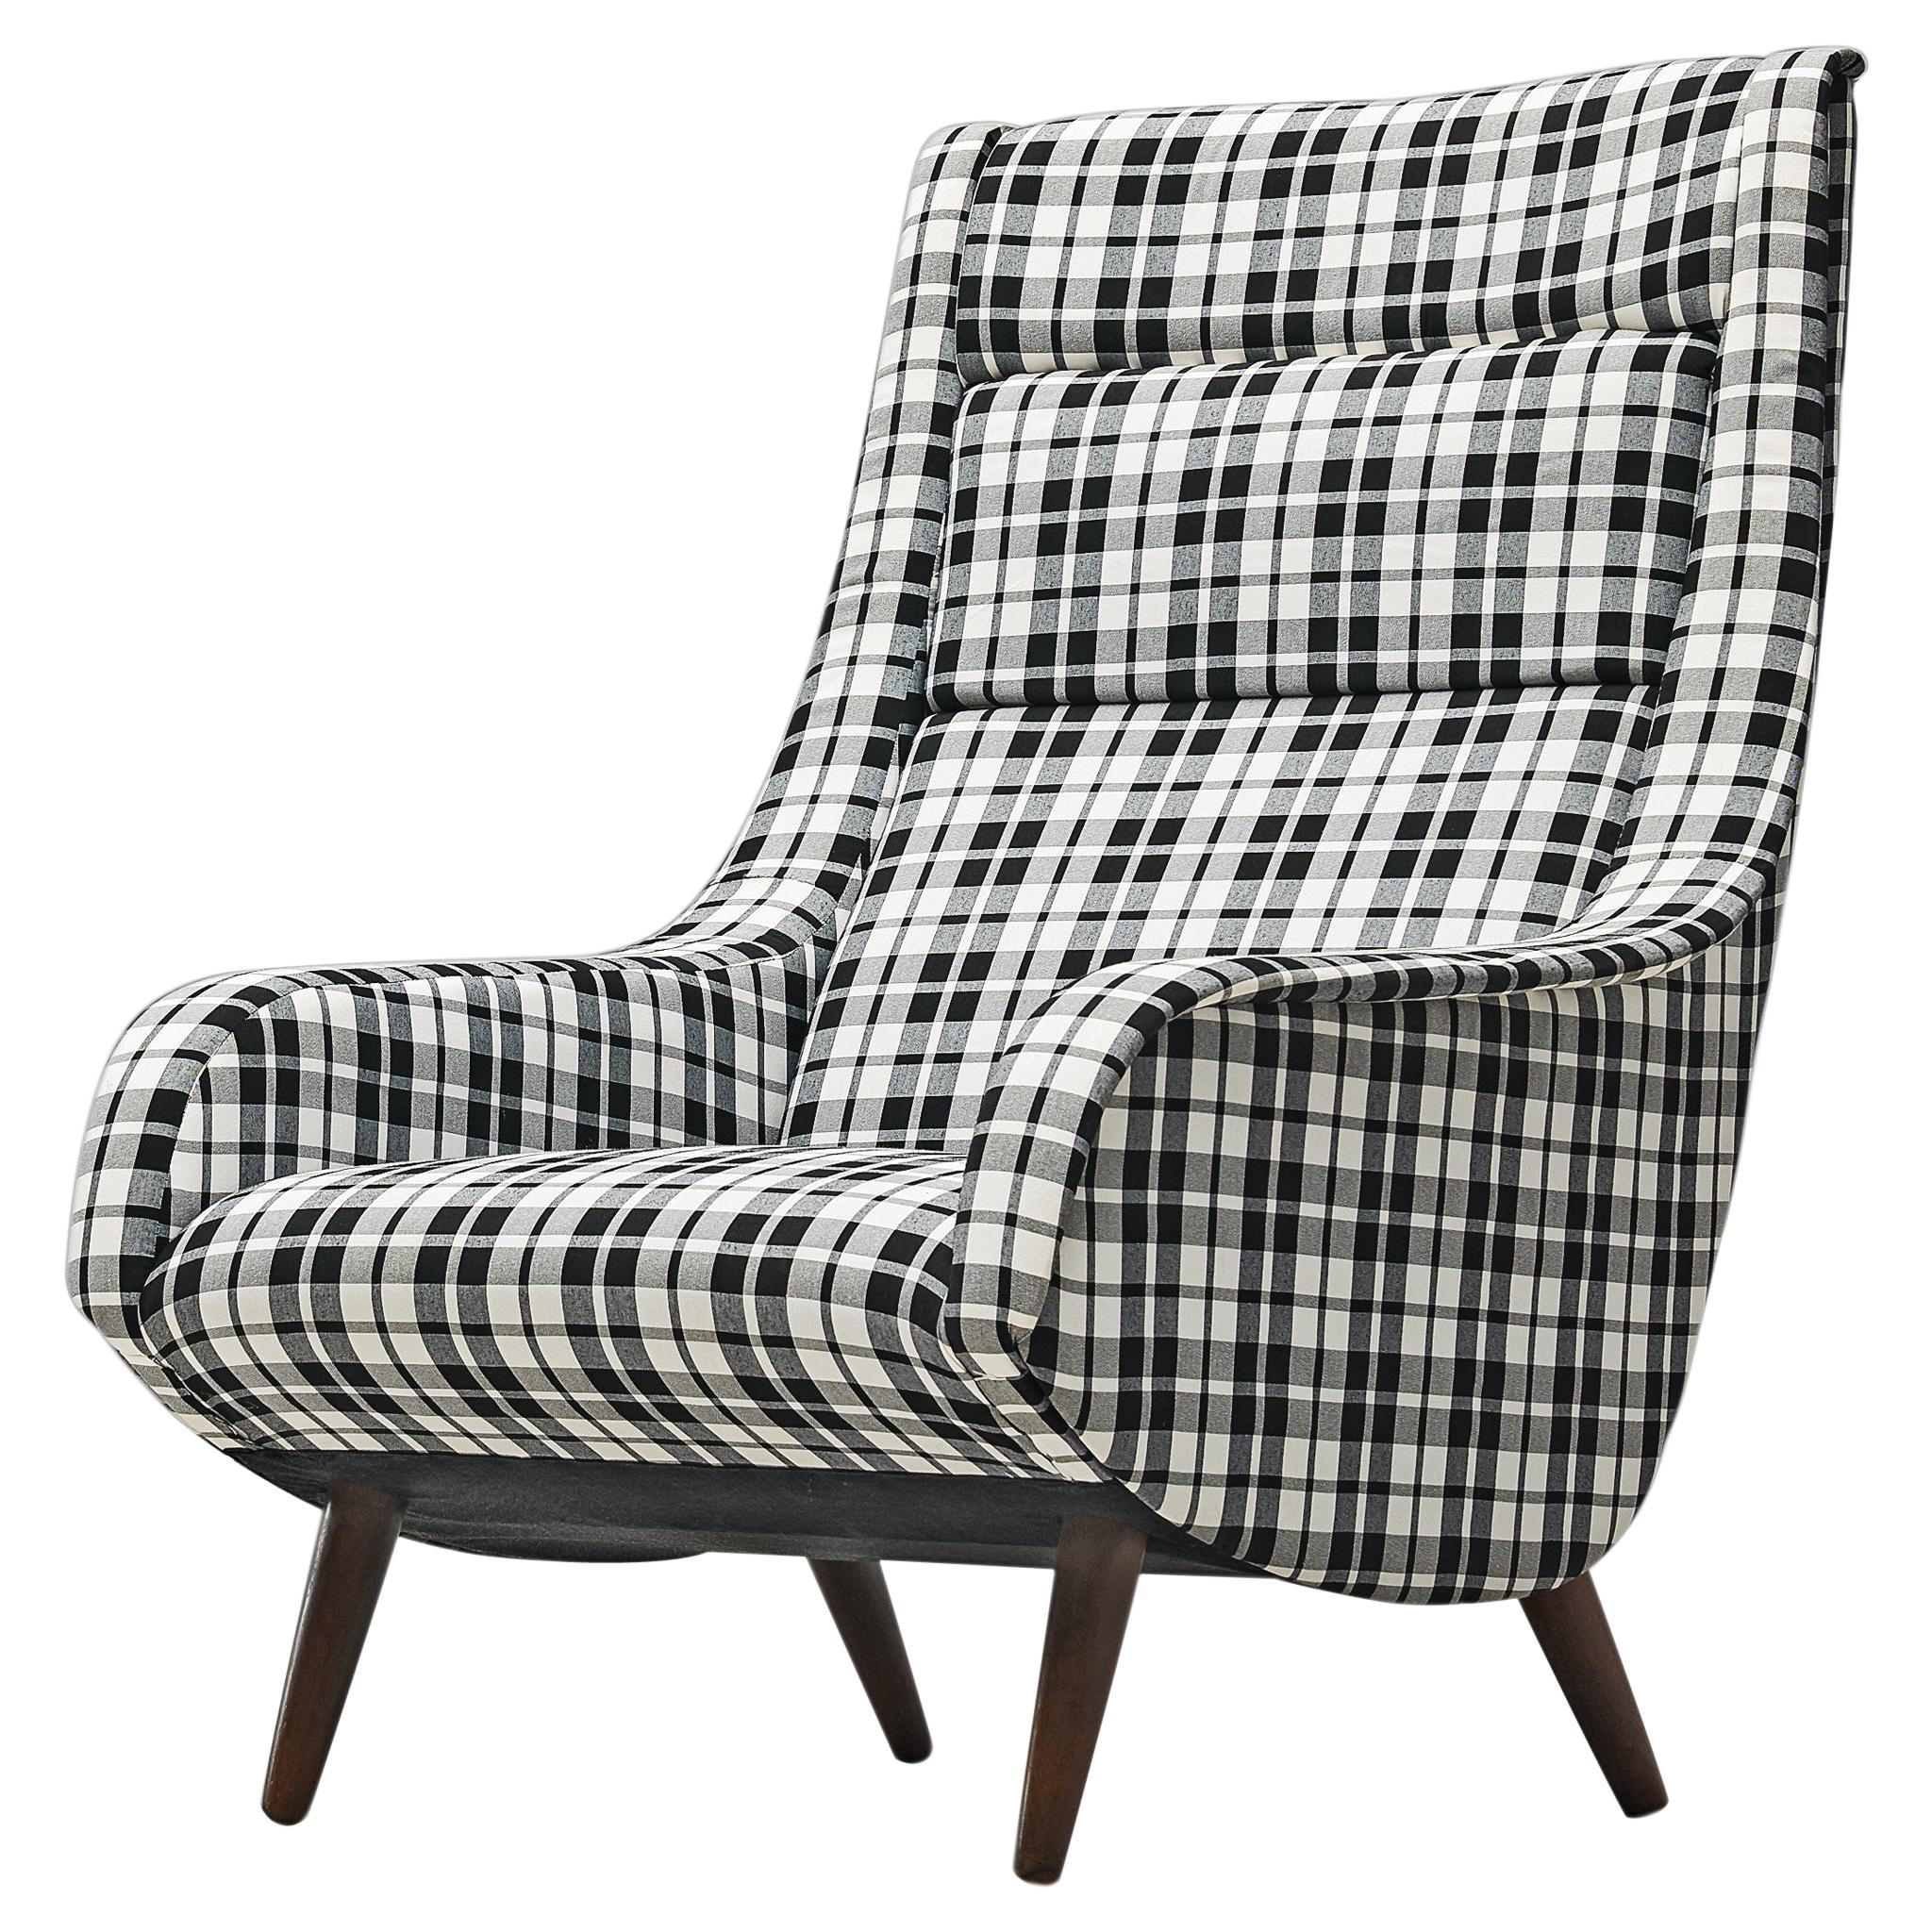 Danish Lounge Chair in Reupholstered Checkered Upholstery